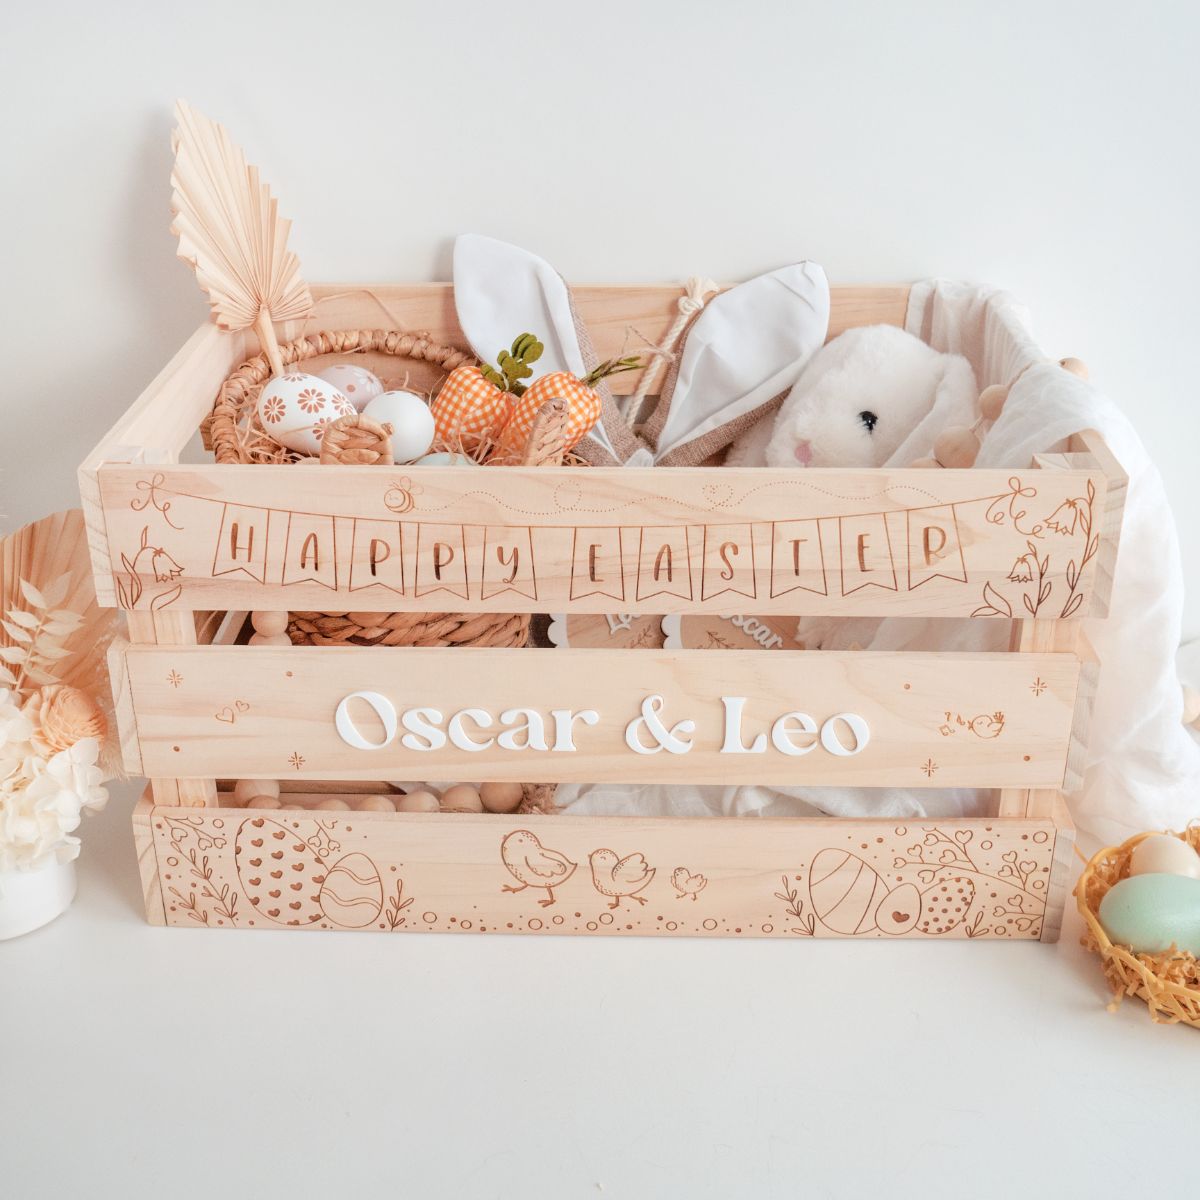 Large Personalized Wooden Easter Crate – Filled with gifts, and other items for the kids. Close up front/top view